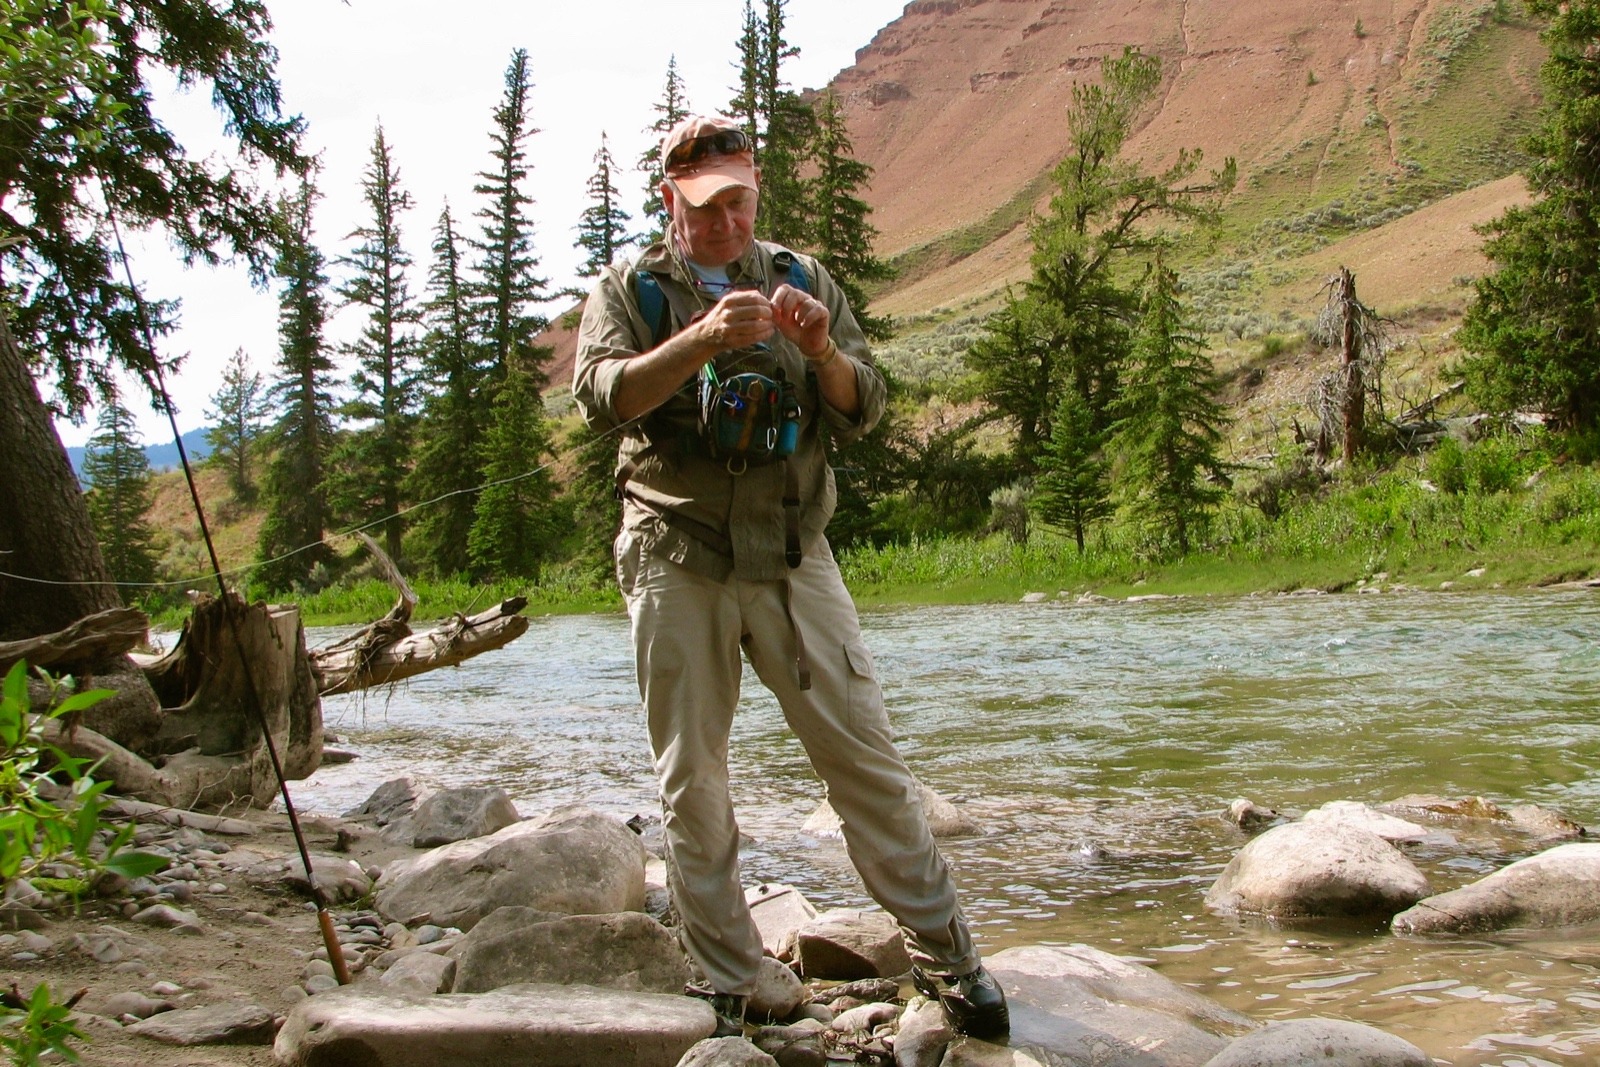 Tom Sadler putting a fly on the tippet of his Tenkara rod in the West. "If you want to understand the ecology, politics and cultures of the West," he says, "then the best place to start is understanding how water arrives and moves across the landscape. And the same is true with public policy and Washington DC."  Photo courtesy Tom Sadler